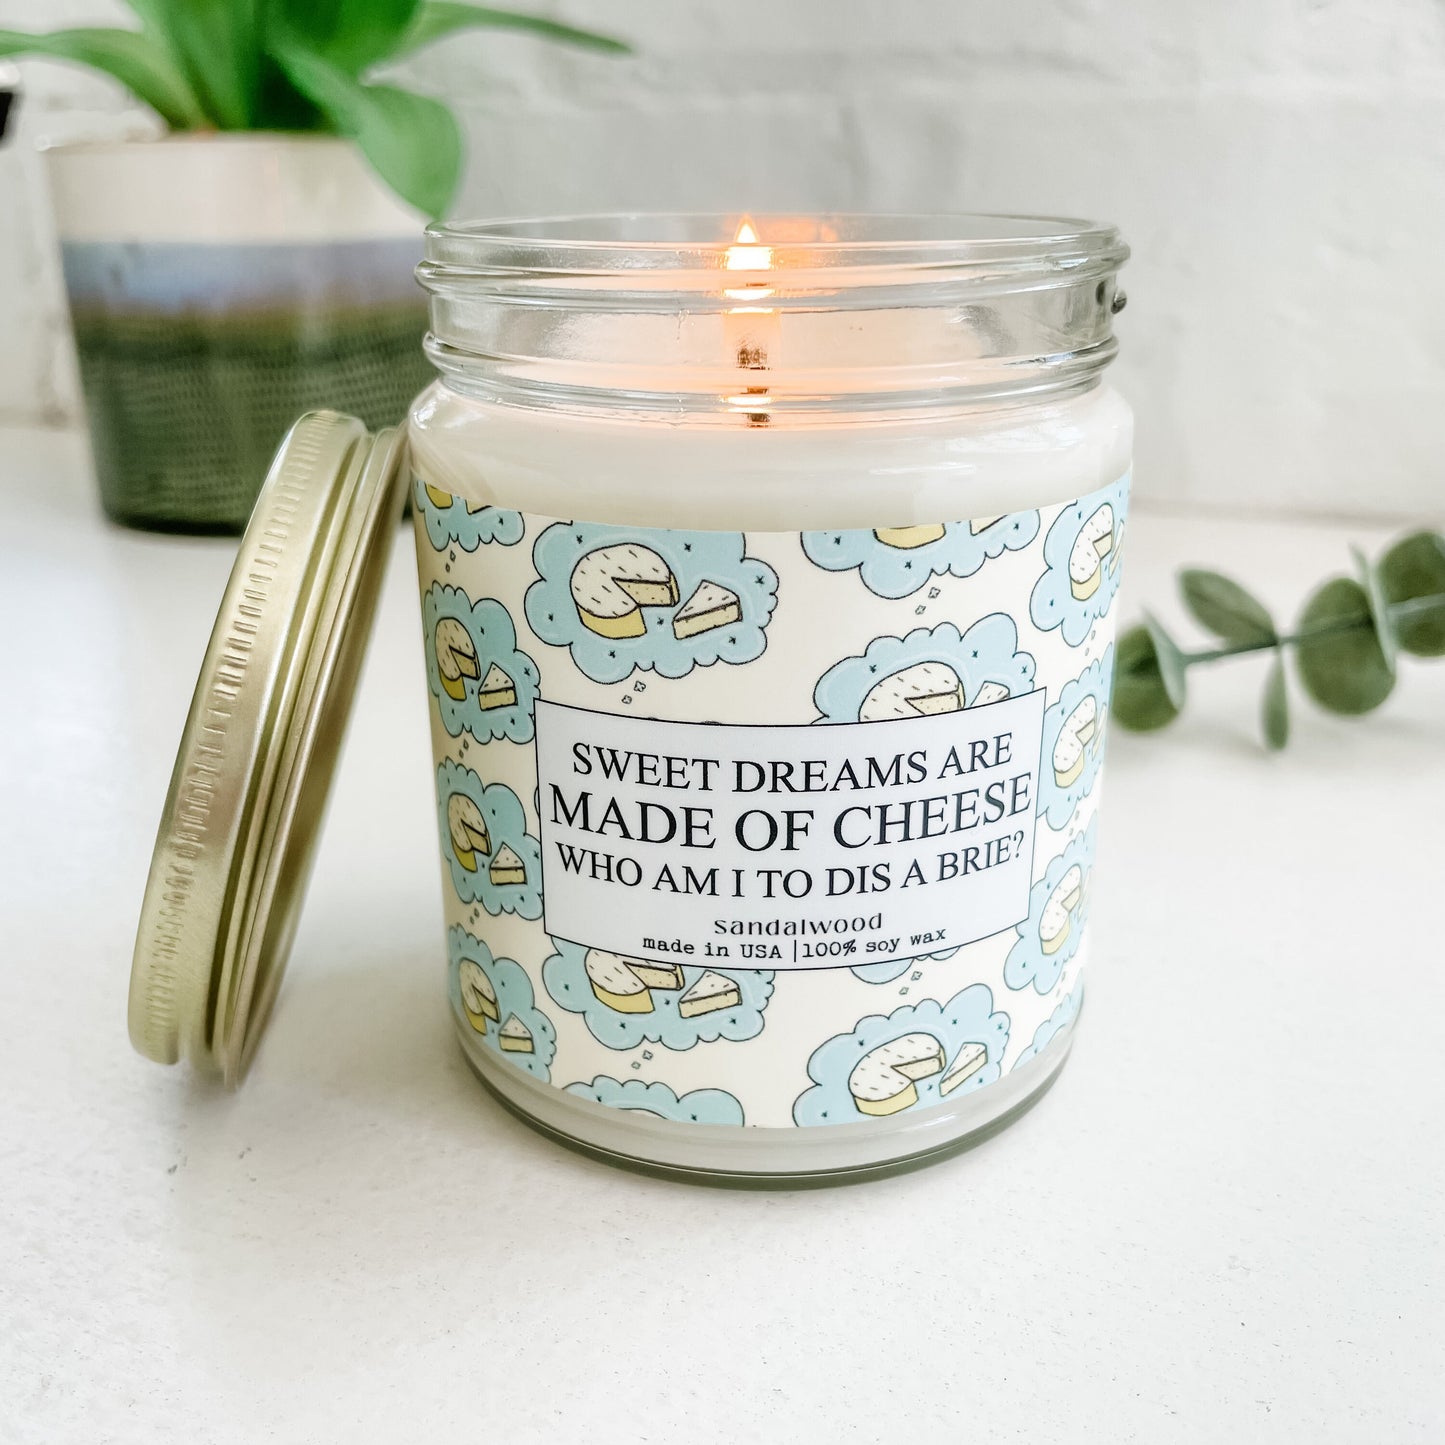 Sweet Dreams Are Made Of Brie - 9oz Glass Jar Soy Candle - Sandalwood Scent